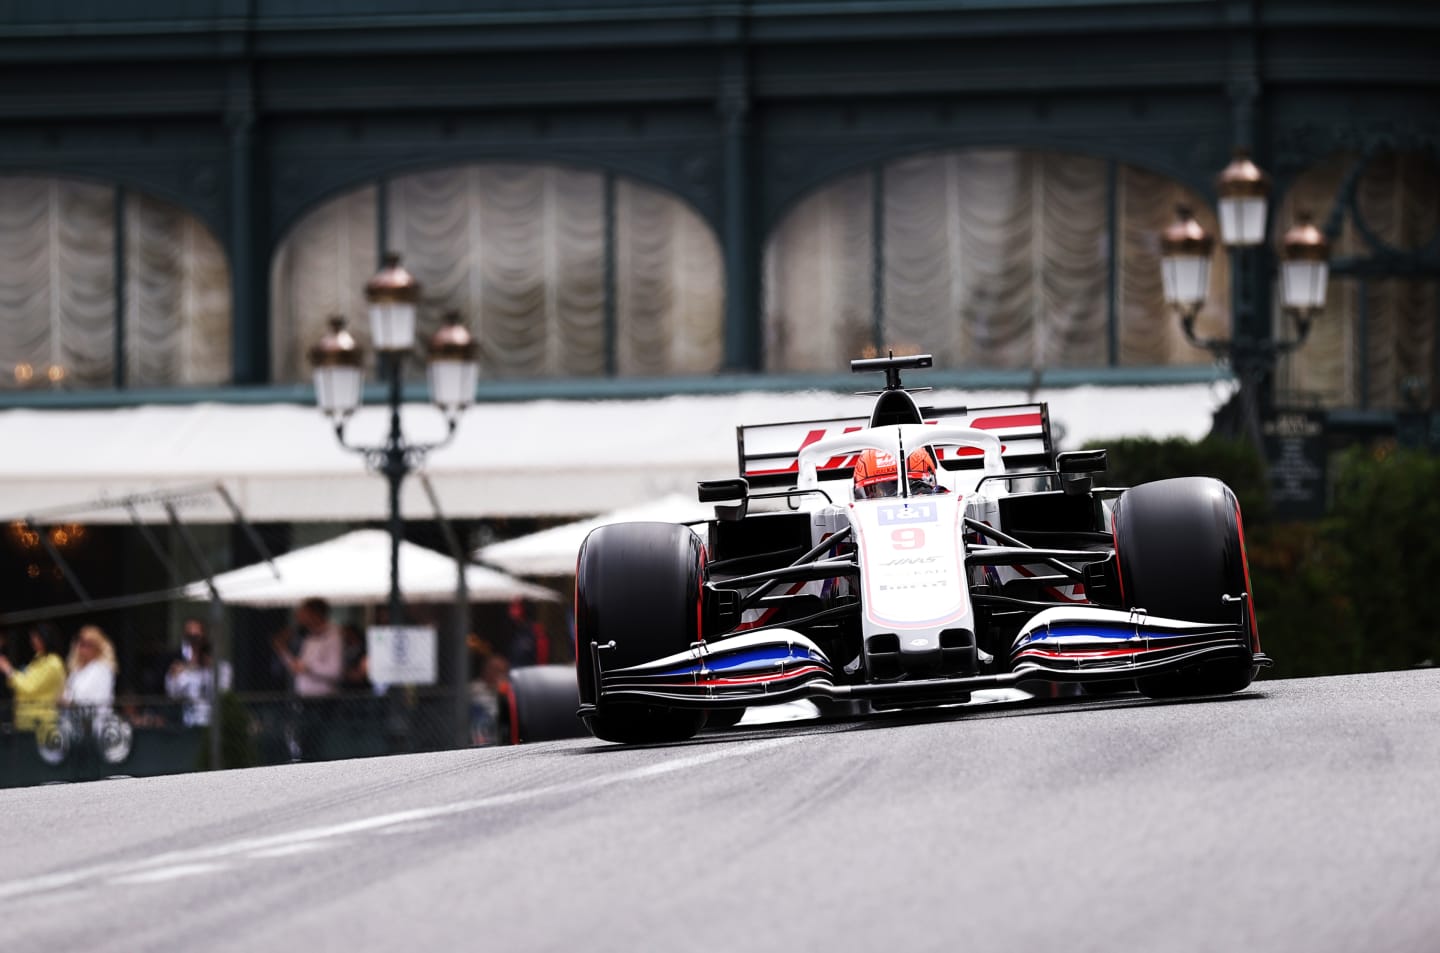 MONTE-CARLO, MONACO - MAY 22: Nikita Mazepin of Russia driving the (9) Haas F1 Team VF-21 Ferrari on track during qualifying for the F1 Grand Prix of Monaco at Circuit de Monaco on May 22, 2021 in Monte-Carlo, Monaco. (Photo by Lars Baron/Getty Images)